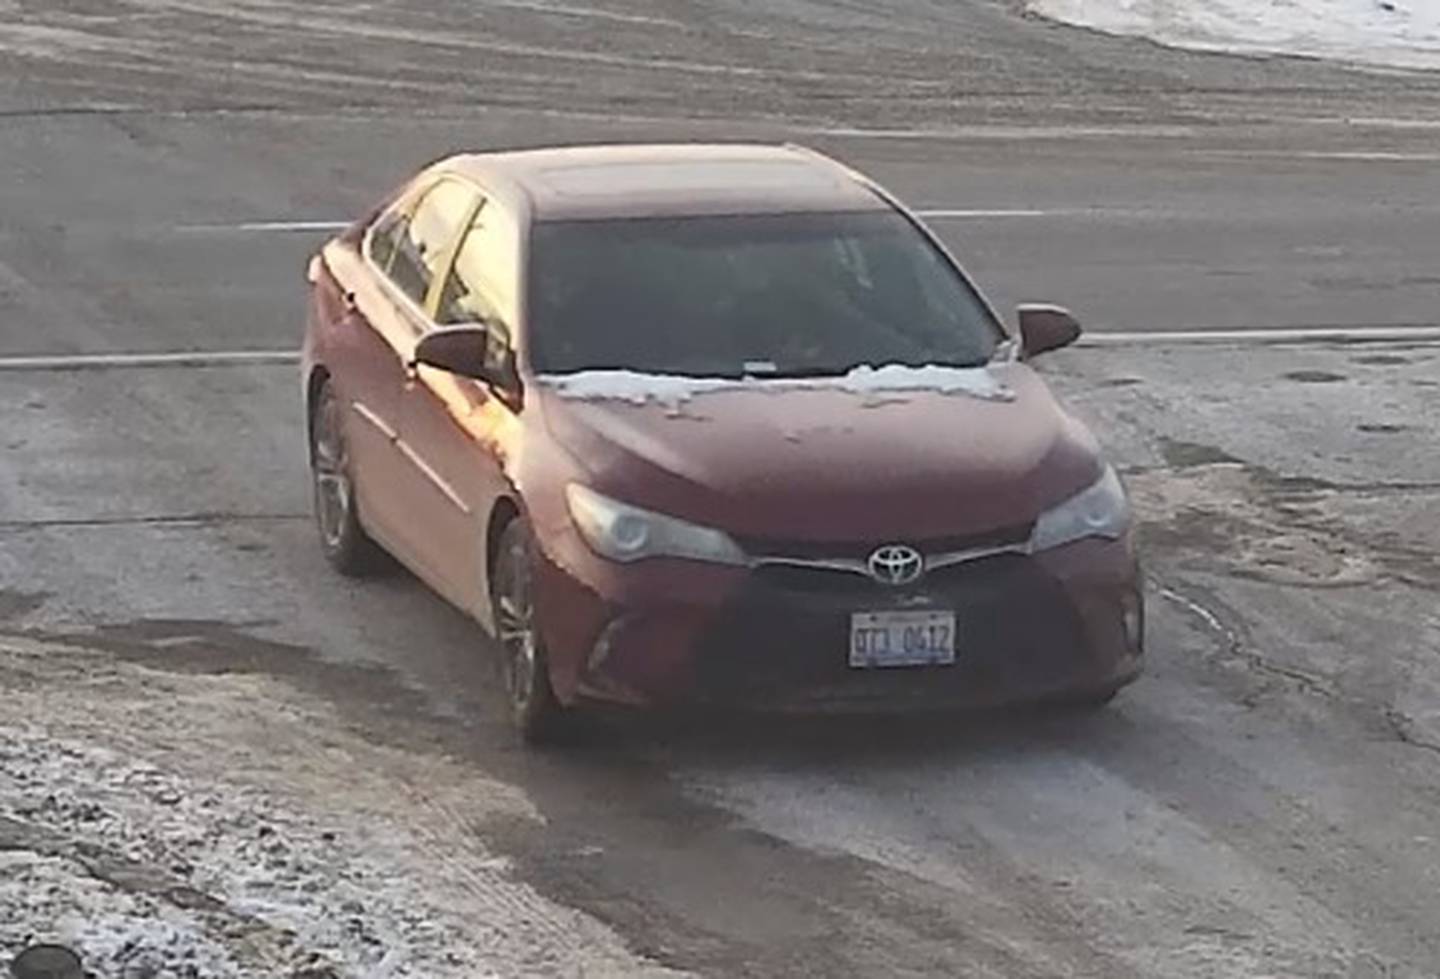 A photo of a red Toyota Camry with a license plate of Q73 0412 released by the Will County Sheriff’s Office. Authorities said the vehicle is connected to a fatal shooting in Joliet Township.